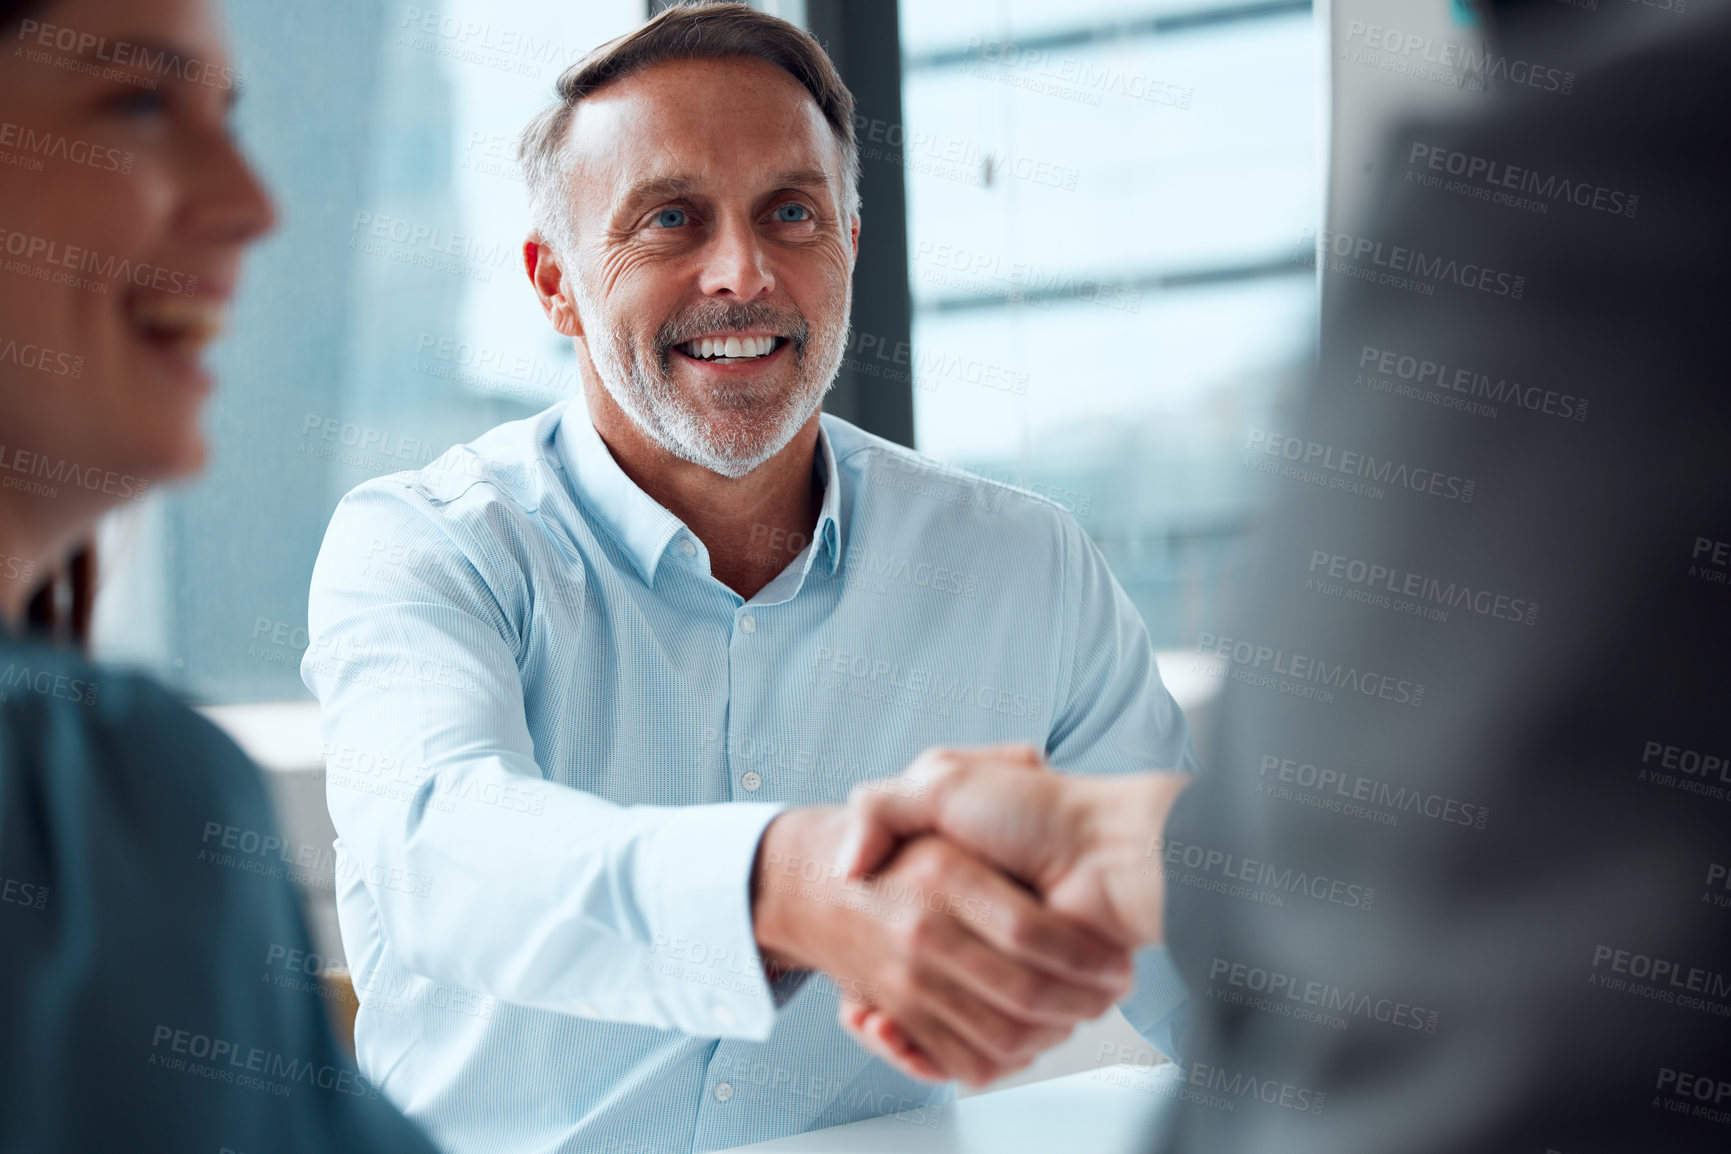 Buy stock photo Shot of a mature businessman shaking hands with a colleague during a meeting in an office